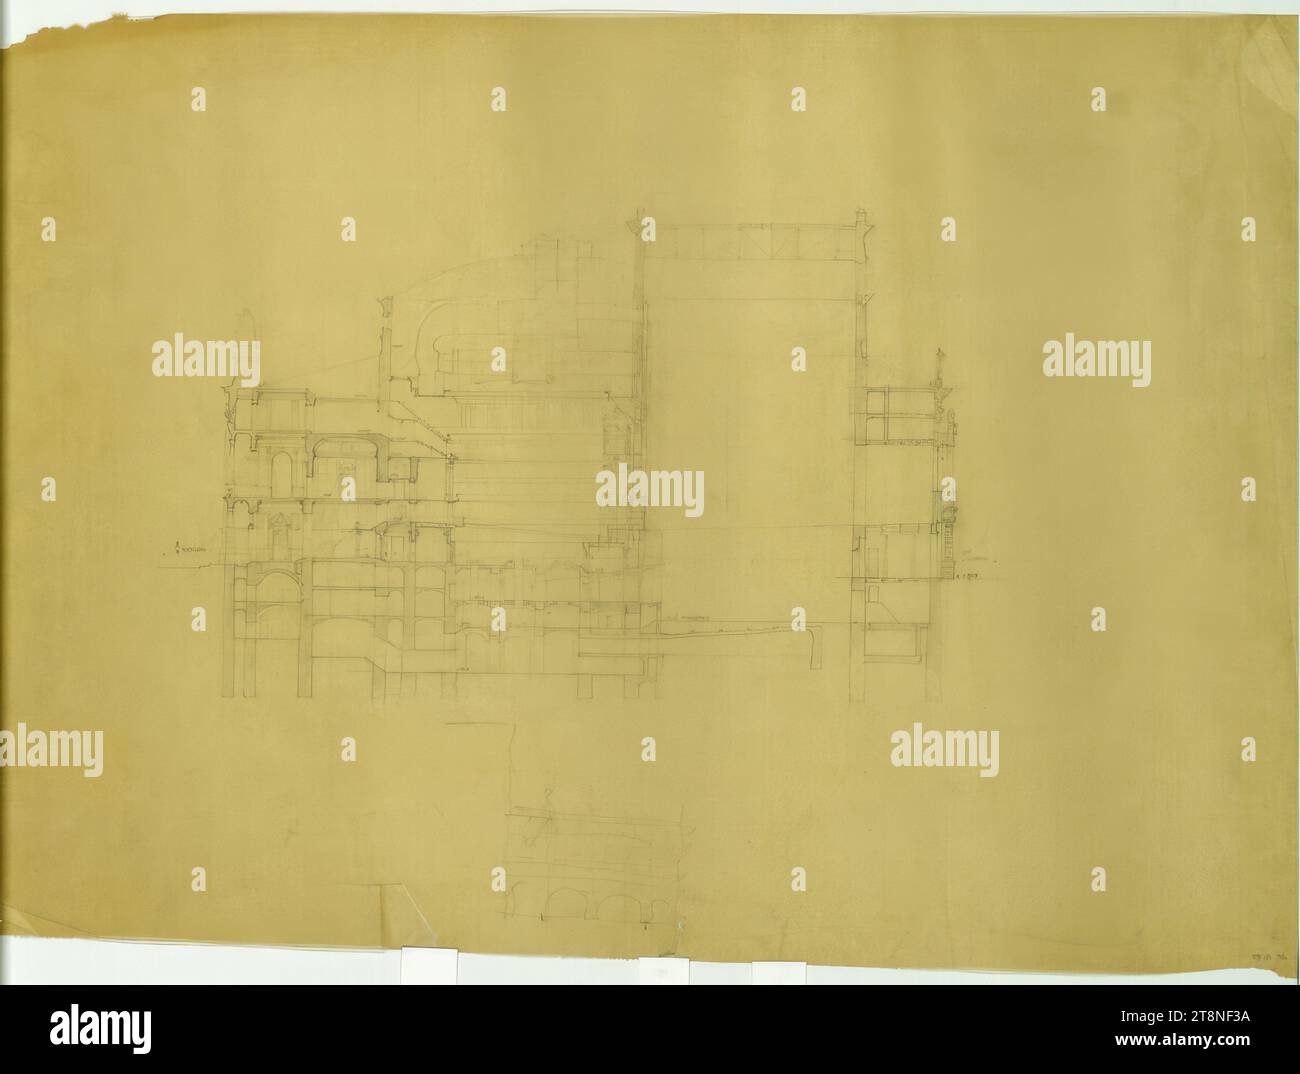 Vienna I, Burgtheater, inventory, longitudinal section, Alexander Popp (St. Leonhard am Forst 1891 - 1947 Linz), 1939, architectural drawing, transparent paper, pencil, 583 x 808 mm Stock Photo